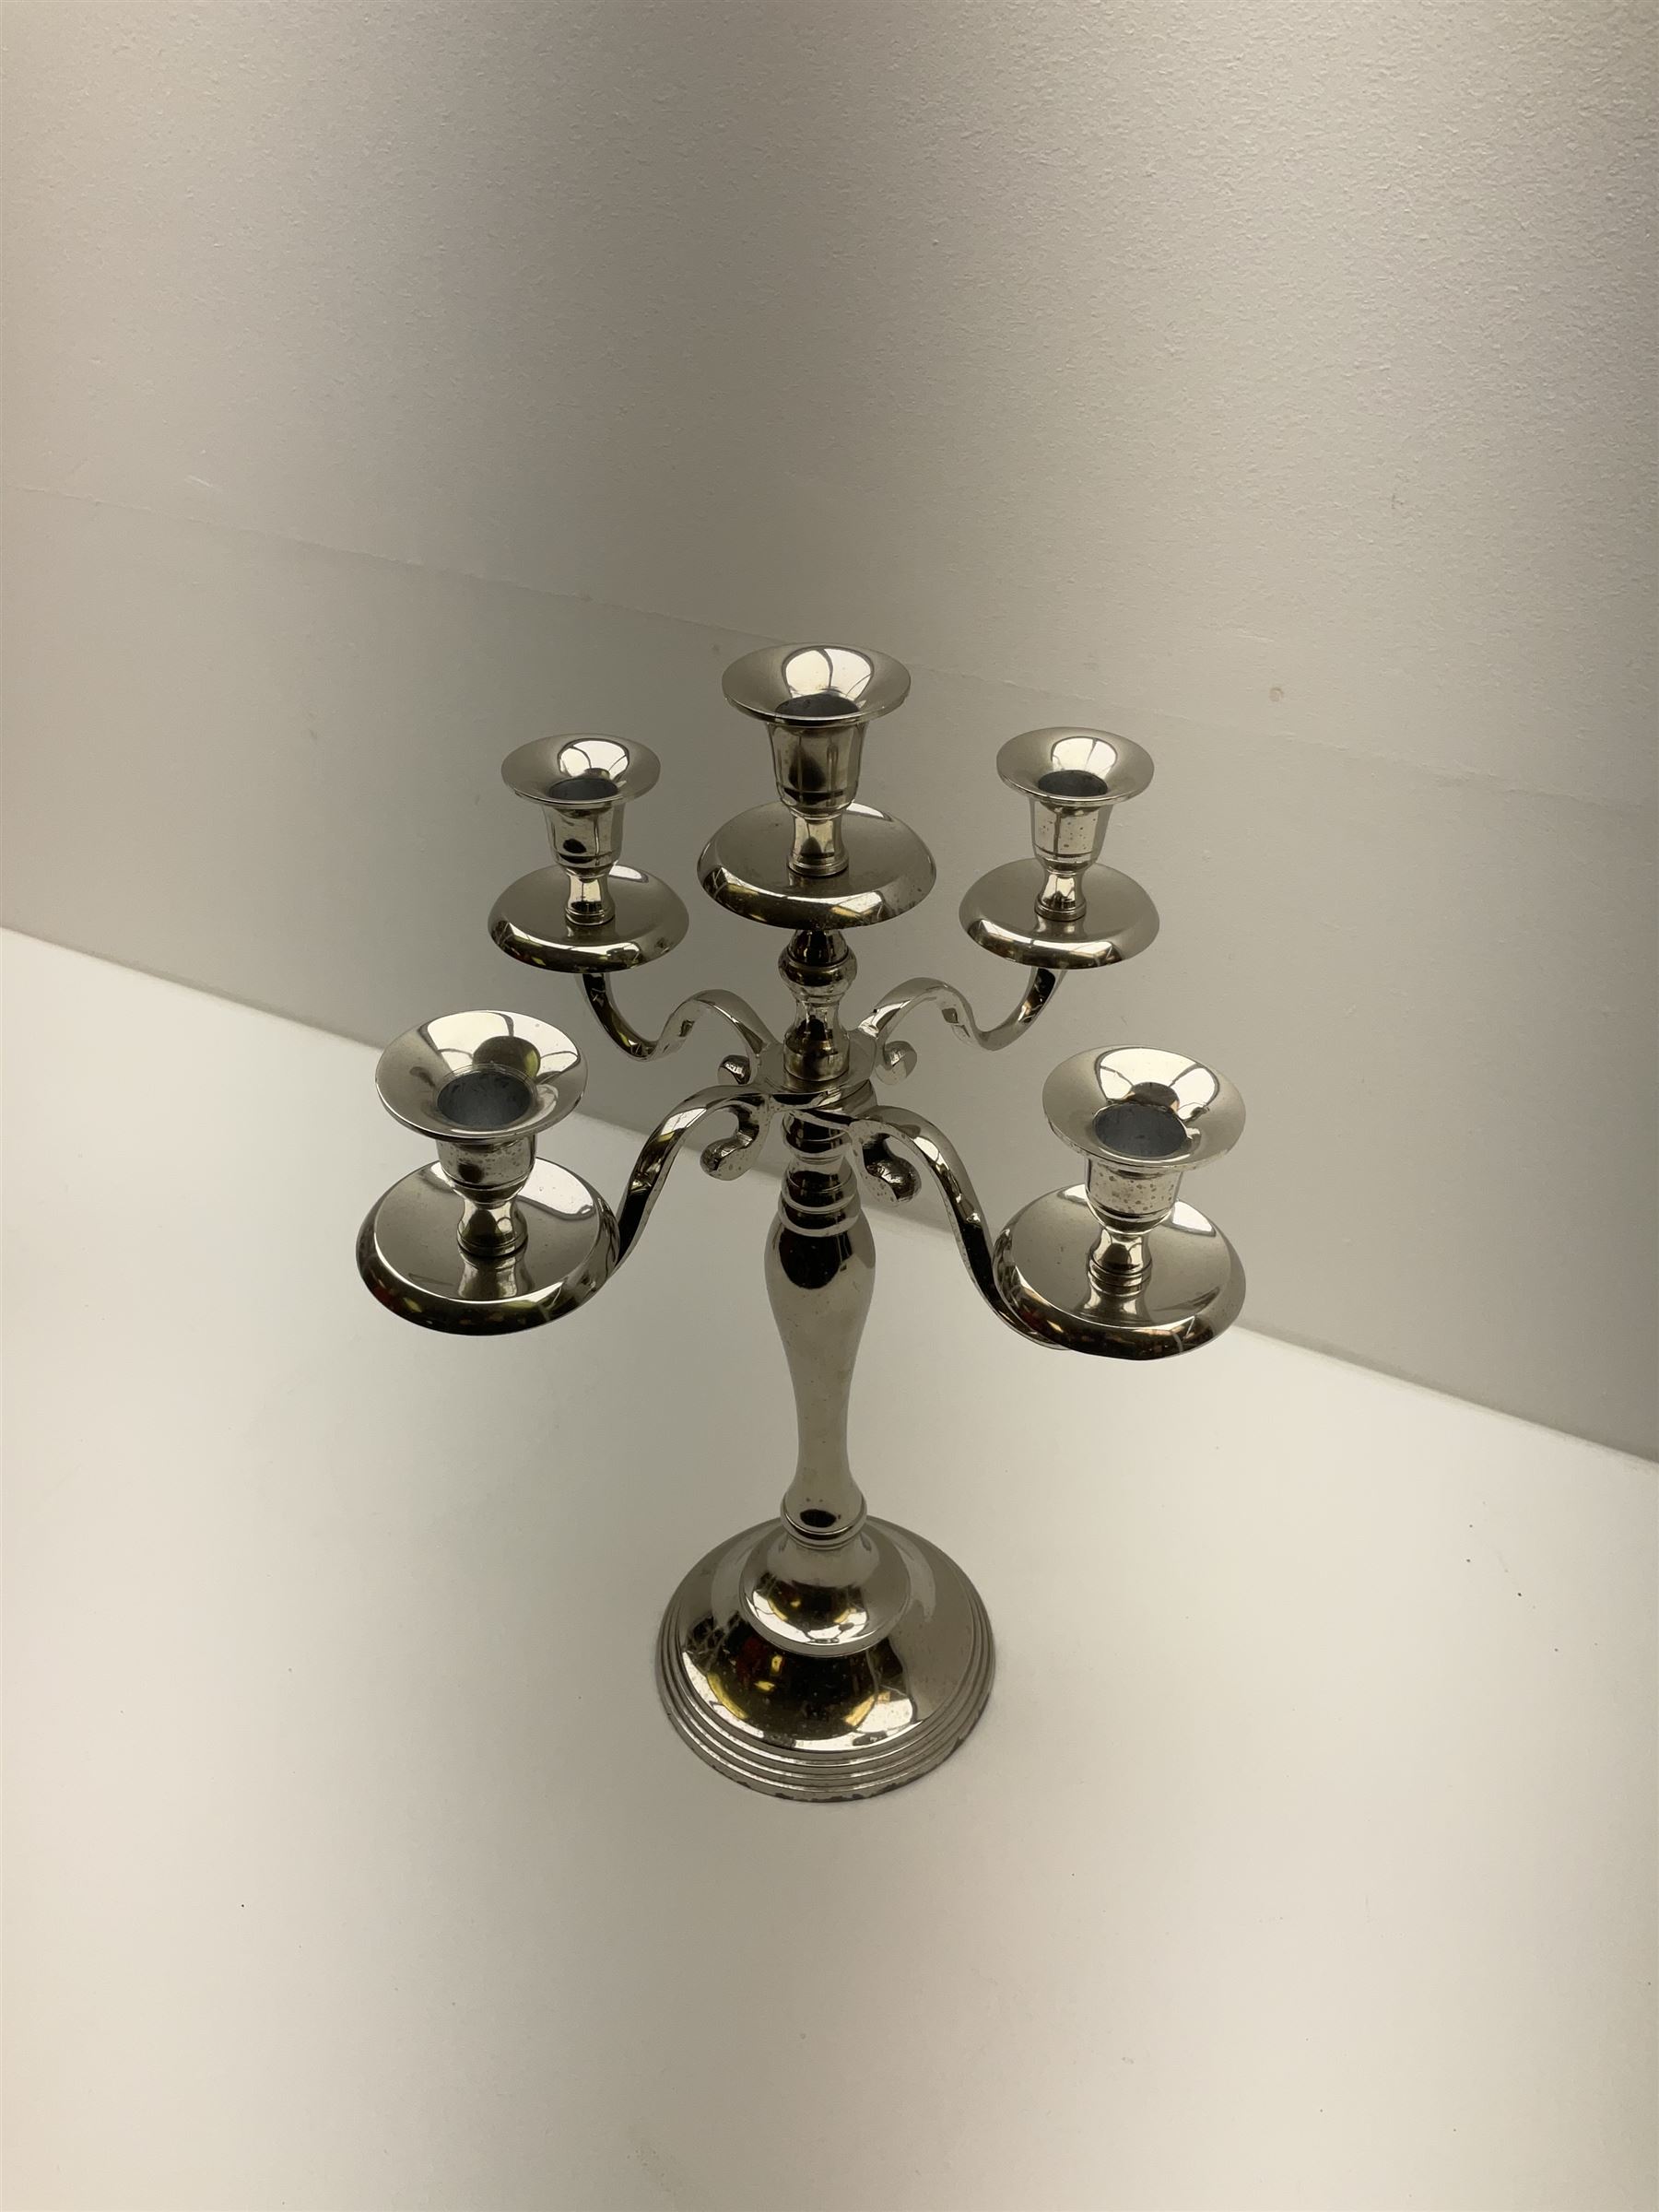 Pair of four branch candelabra - Image 3 of 4